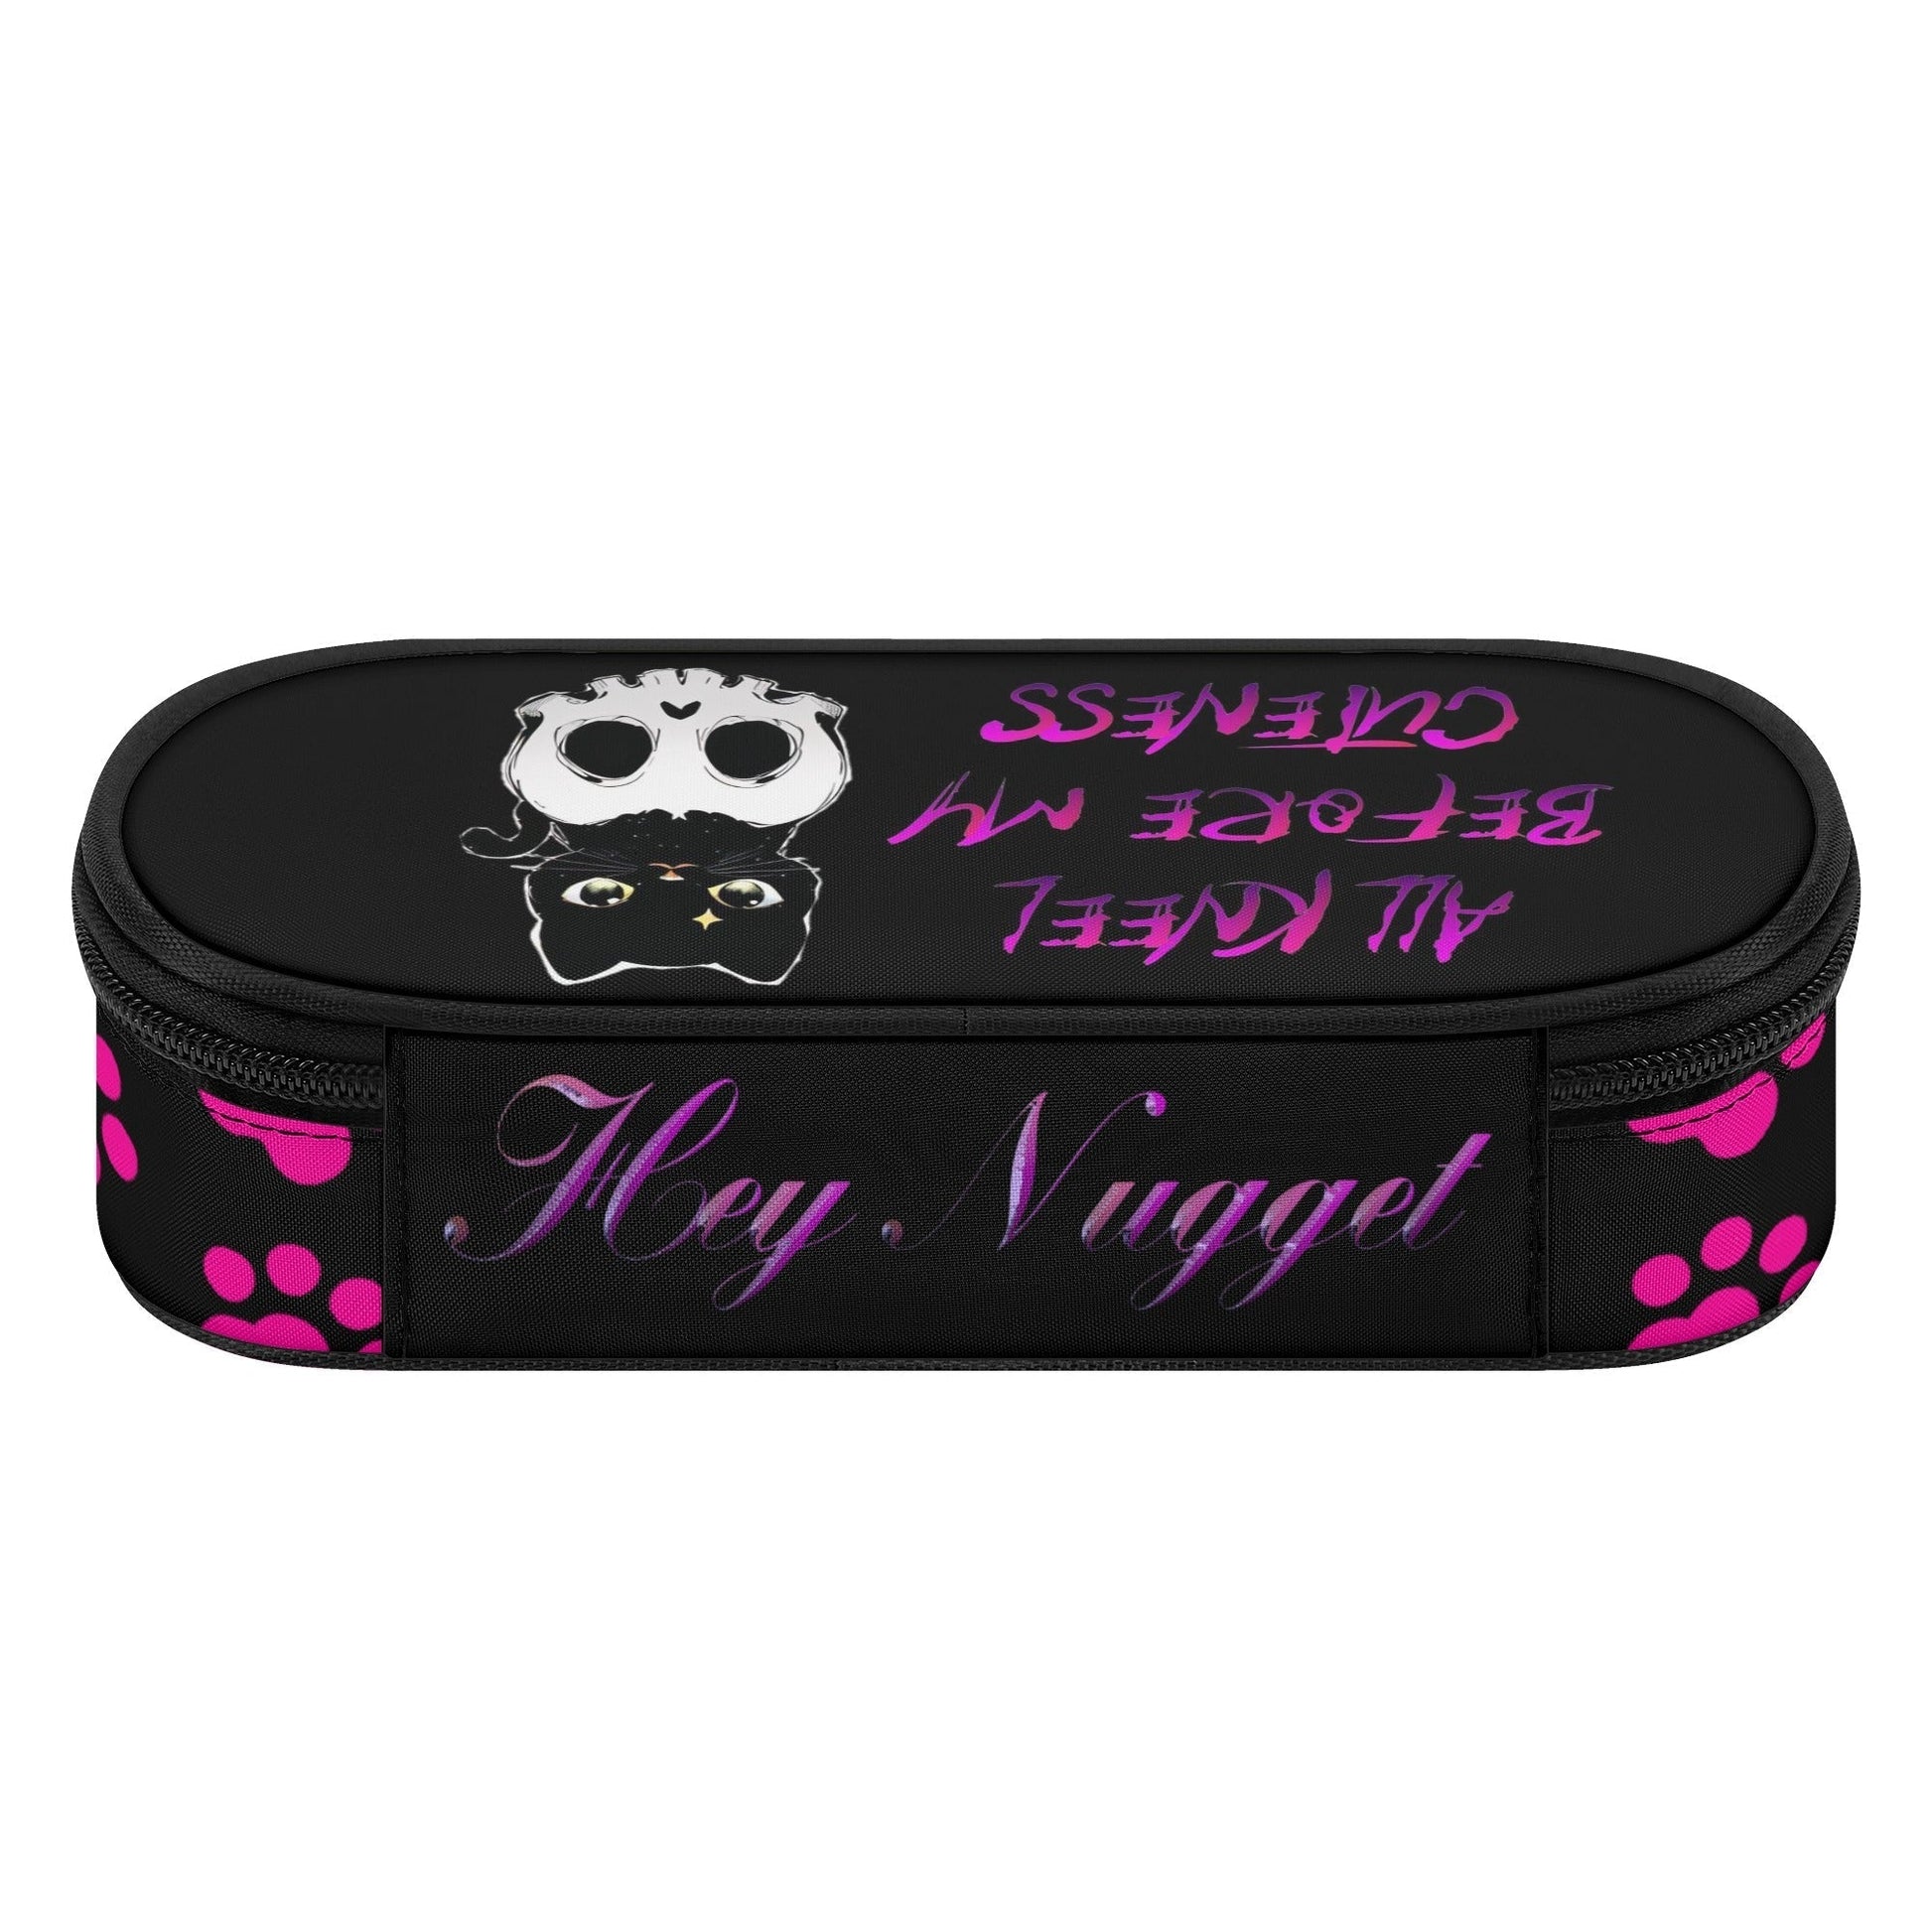 Stand out  with the  Kneel before my cuteness 3-Layer Pencil Case  available at Hey Nugget. Grab yours today!